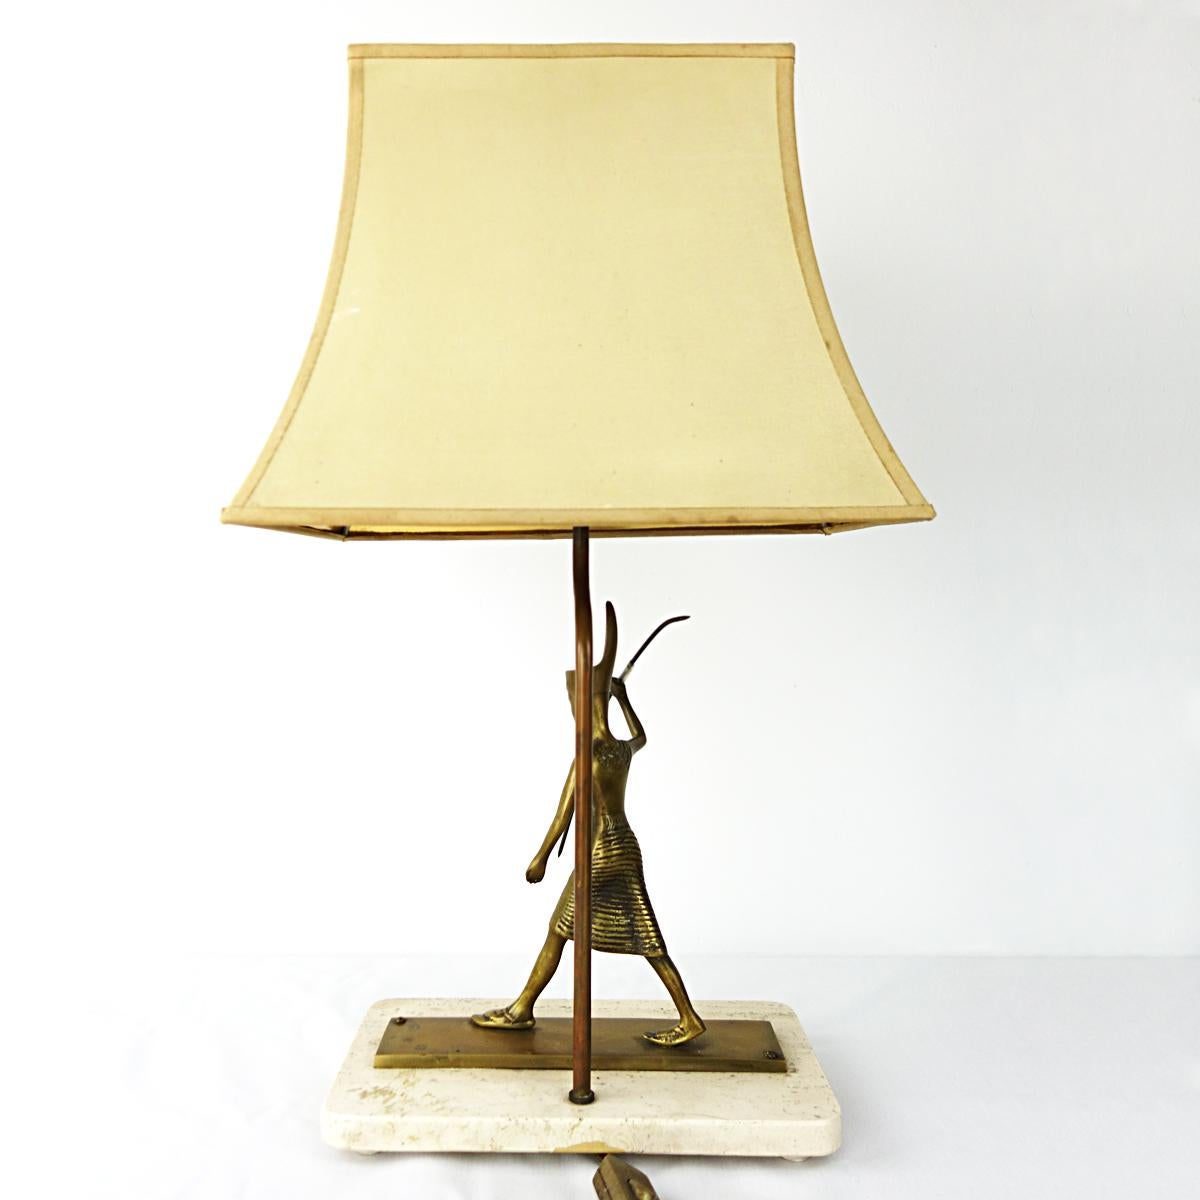 Neoclassical Table Lamp with Marble Foot and Egyptian Warrior under the Shade In Good Condition For Sale In Doornspijk, NL